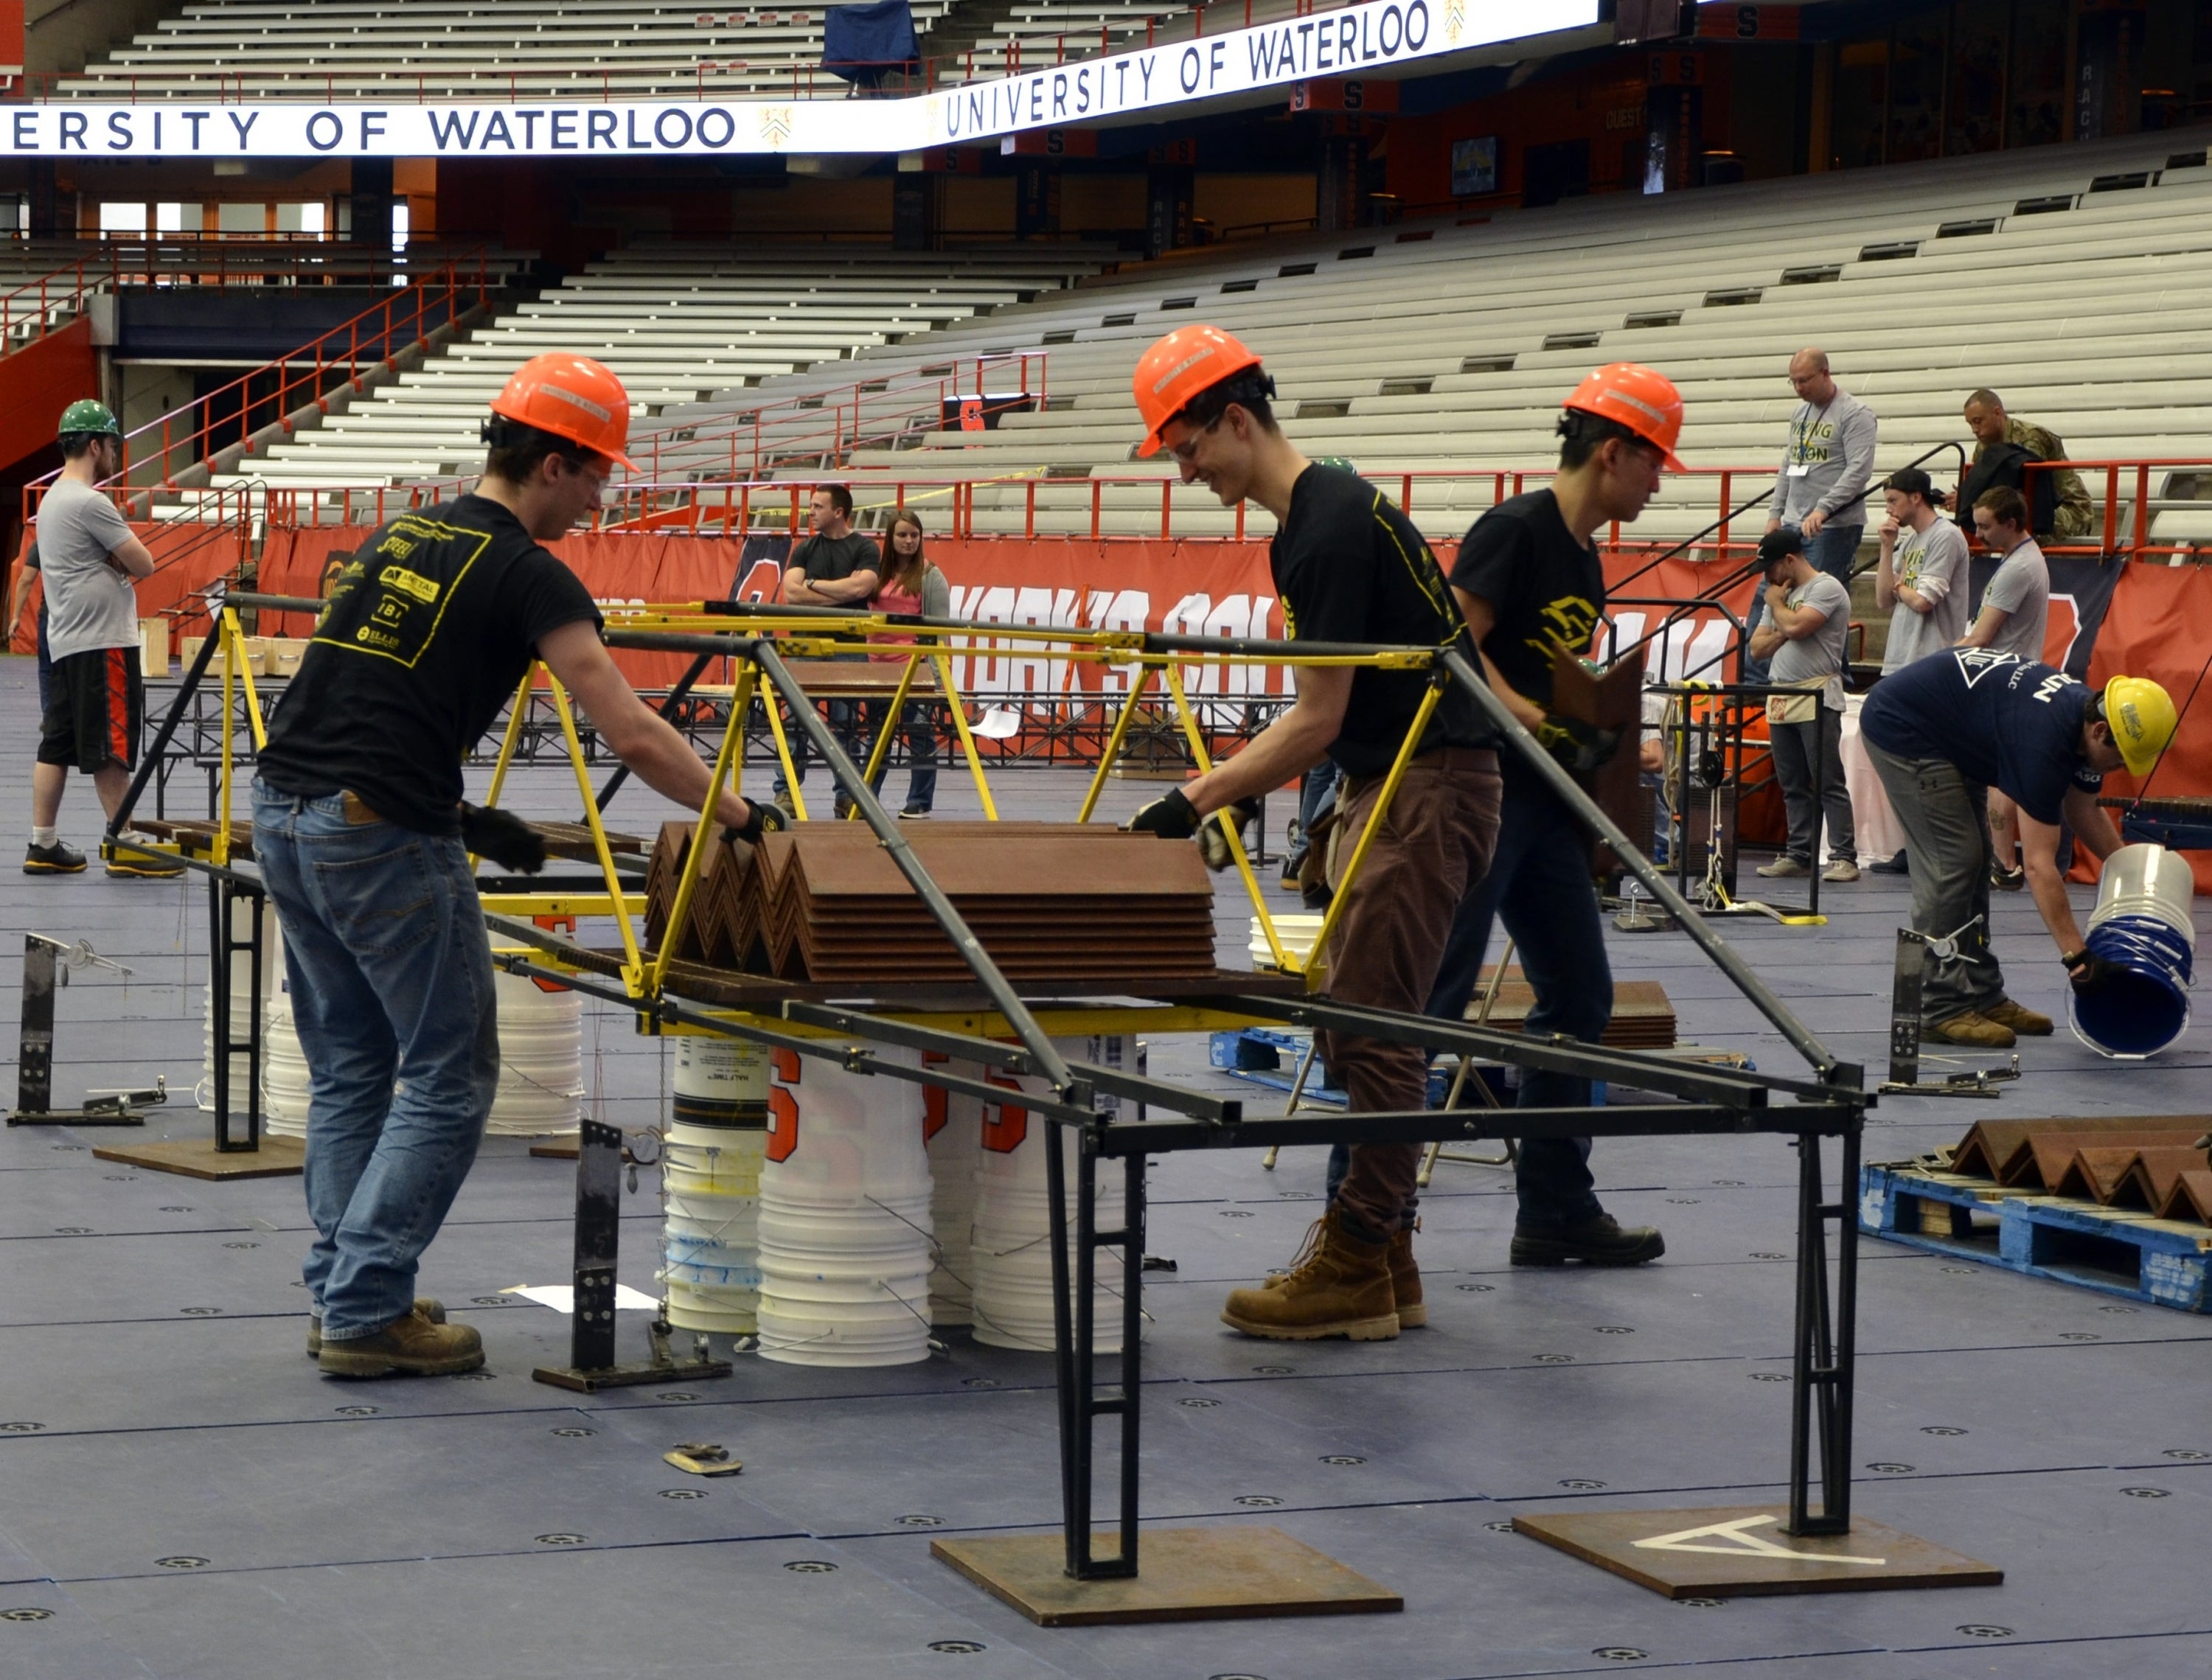 Members of the Waterloo Engineering steel bridge team in action at a competition at Syracuse University.